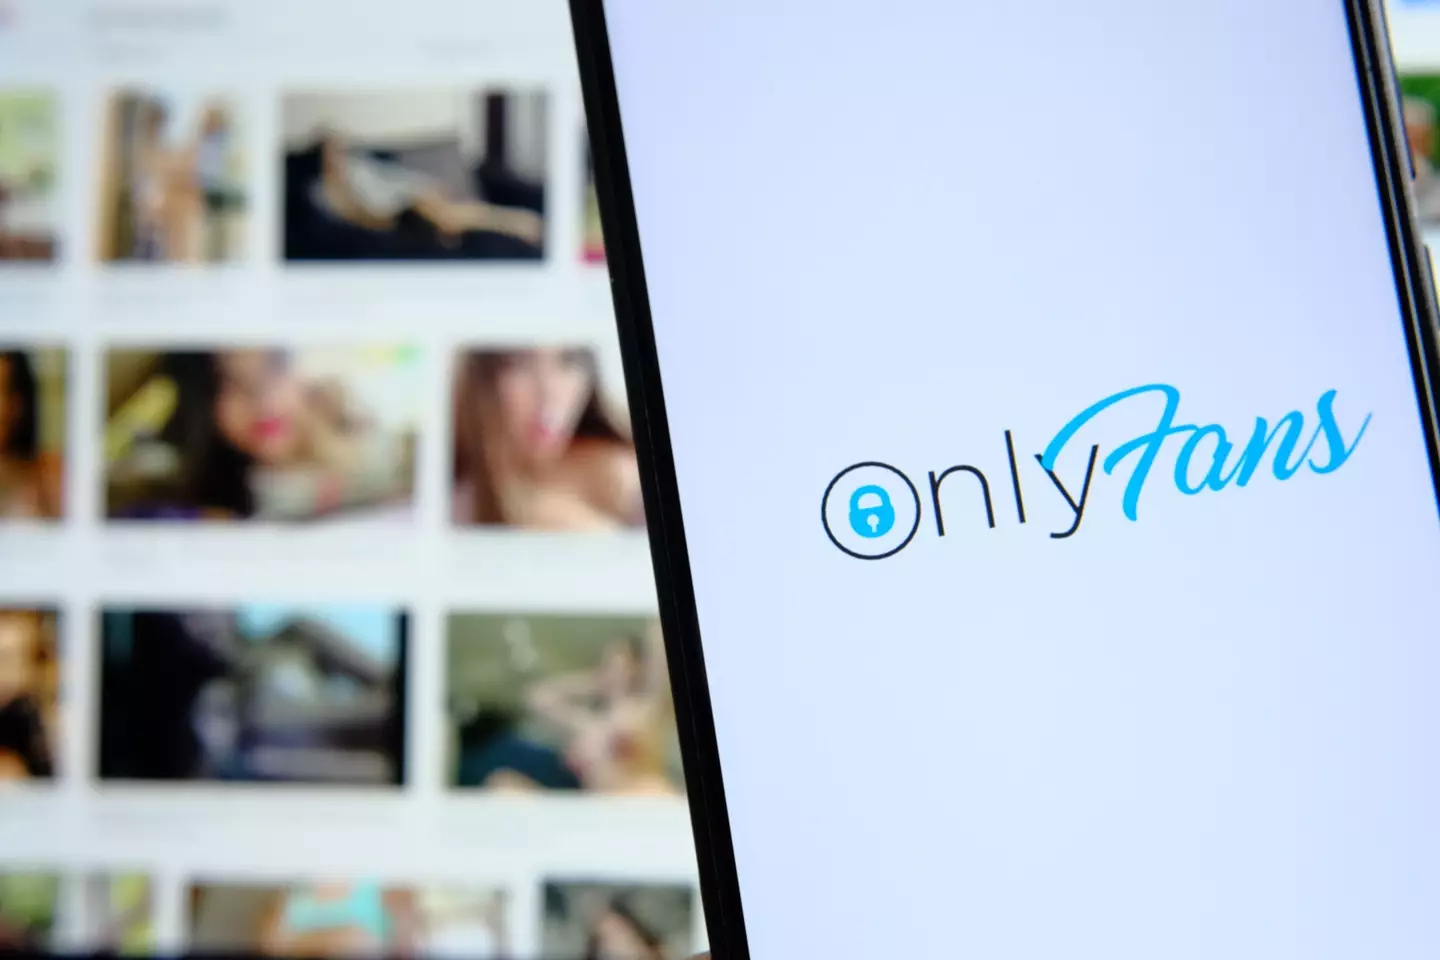 A preschool teacher has been sacked after her OnlyFans account was leaked and revealed a photograph taken on school grounds.